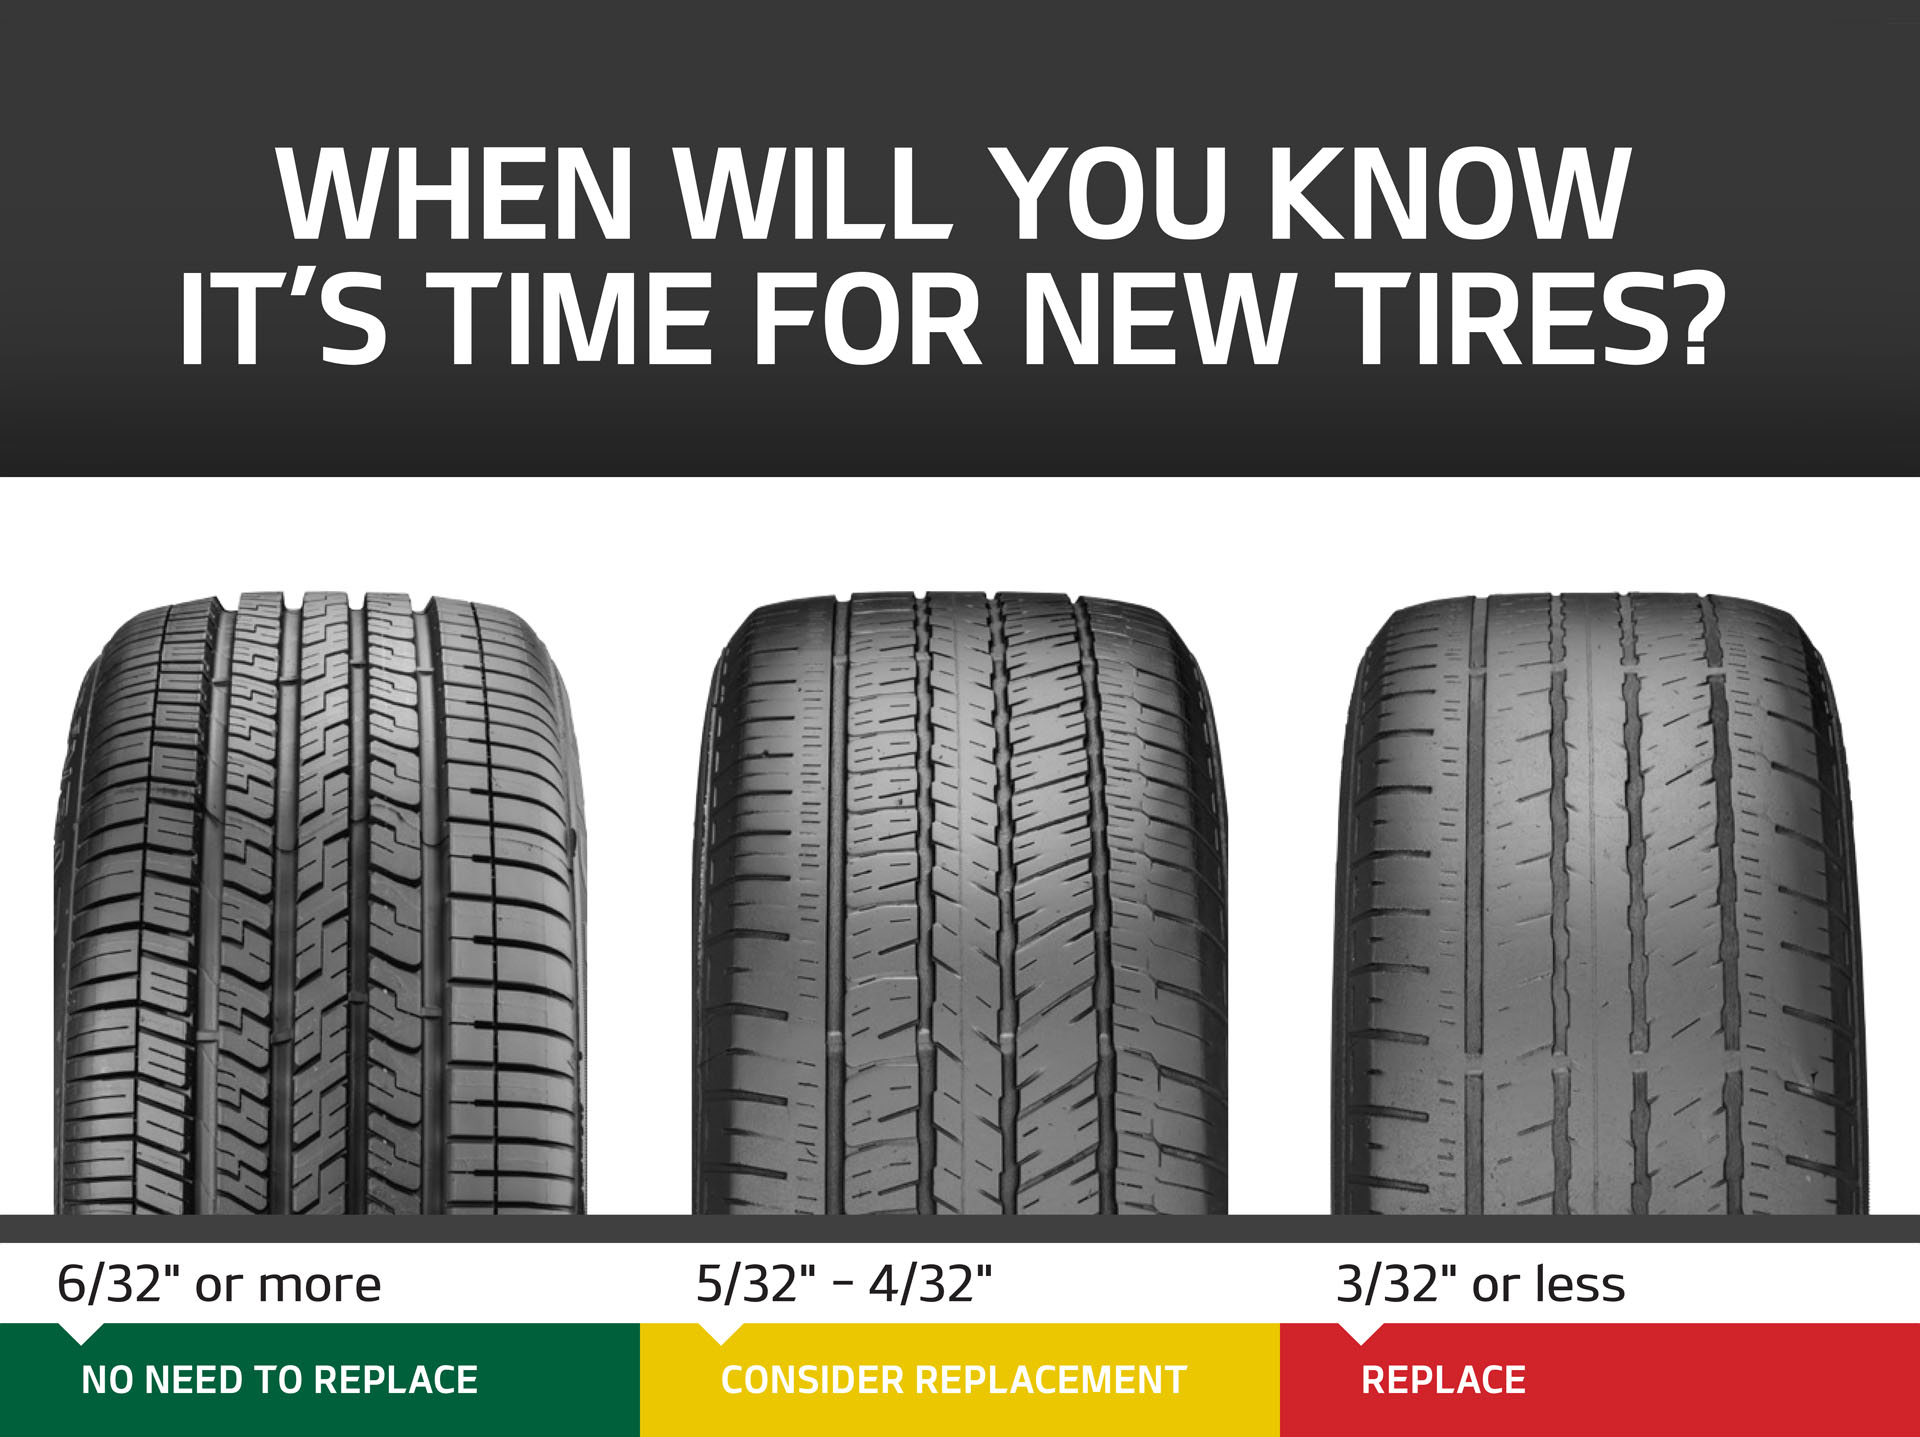 When will you know it's time for new tires? 6/32 inches of tread, no need to replace. 5/32 to 4/32 inches of tread, consider replacement. 3/32 inches of tread or less, it's time to replace the tires.